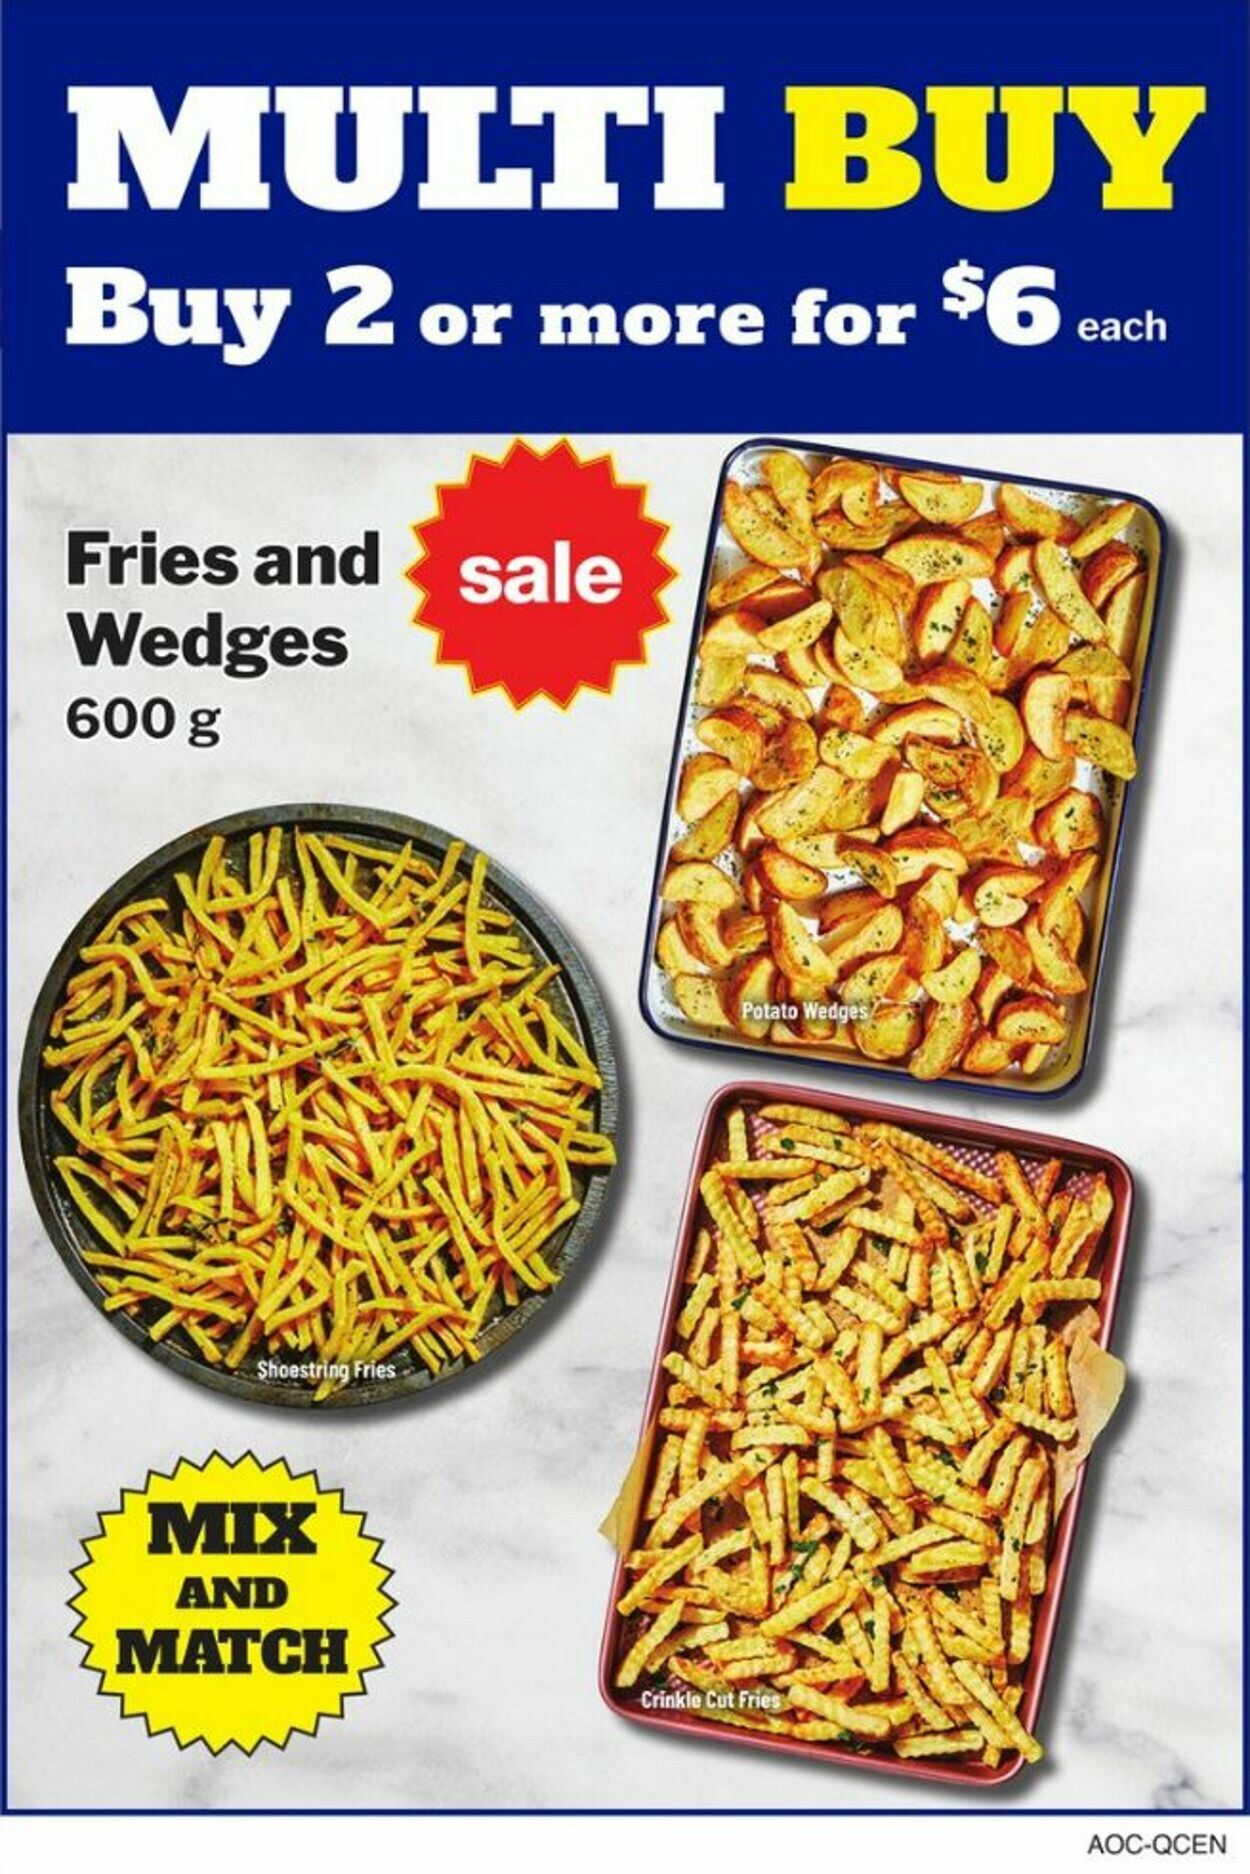 M&M Food Market Flyer from 10/26/2023